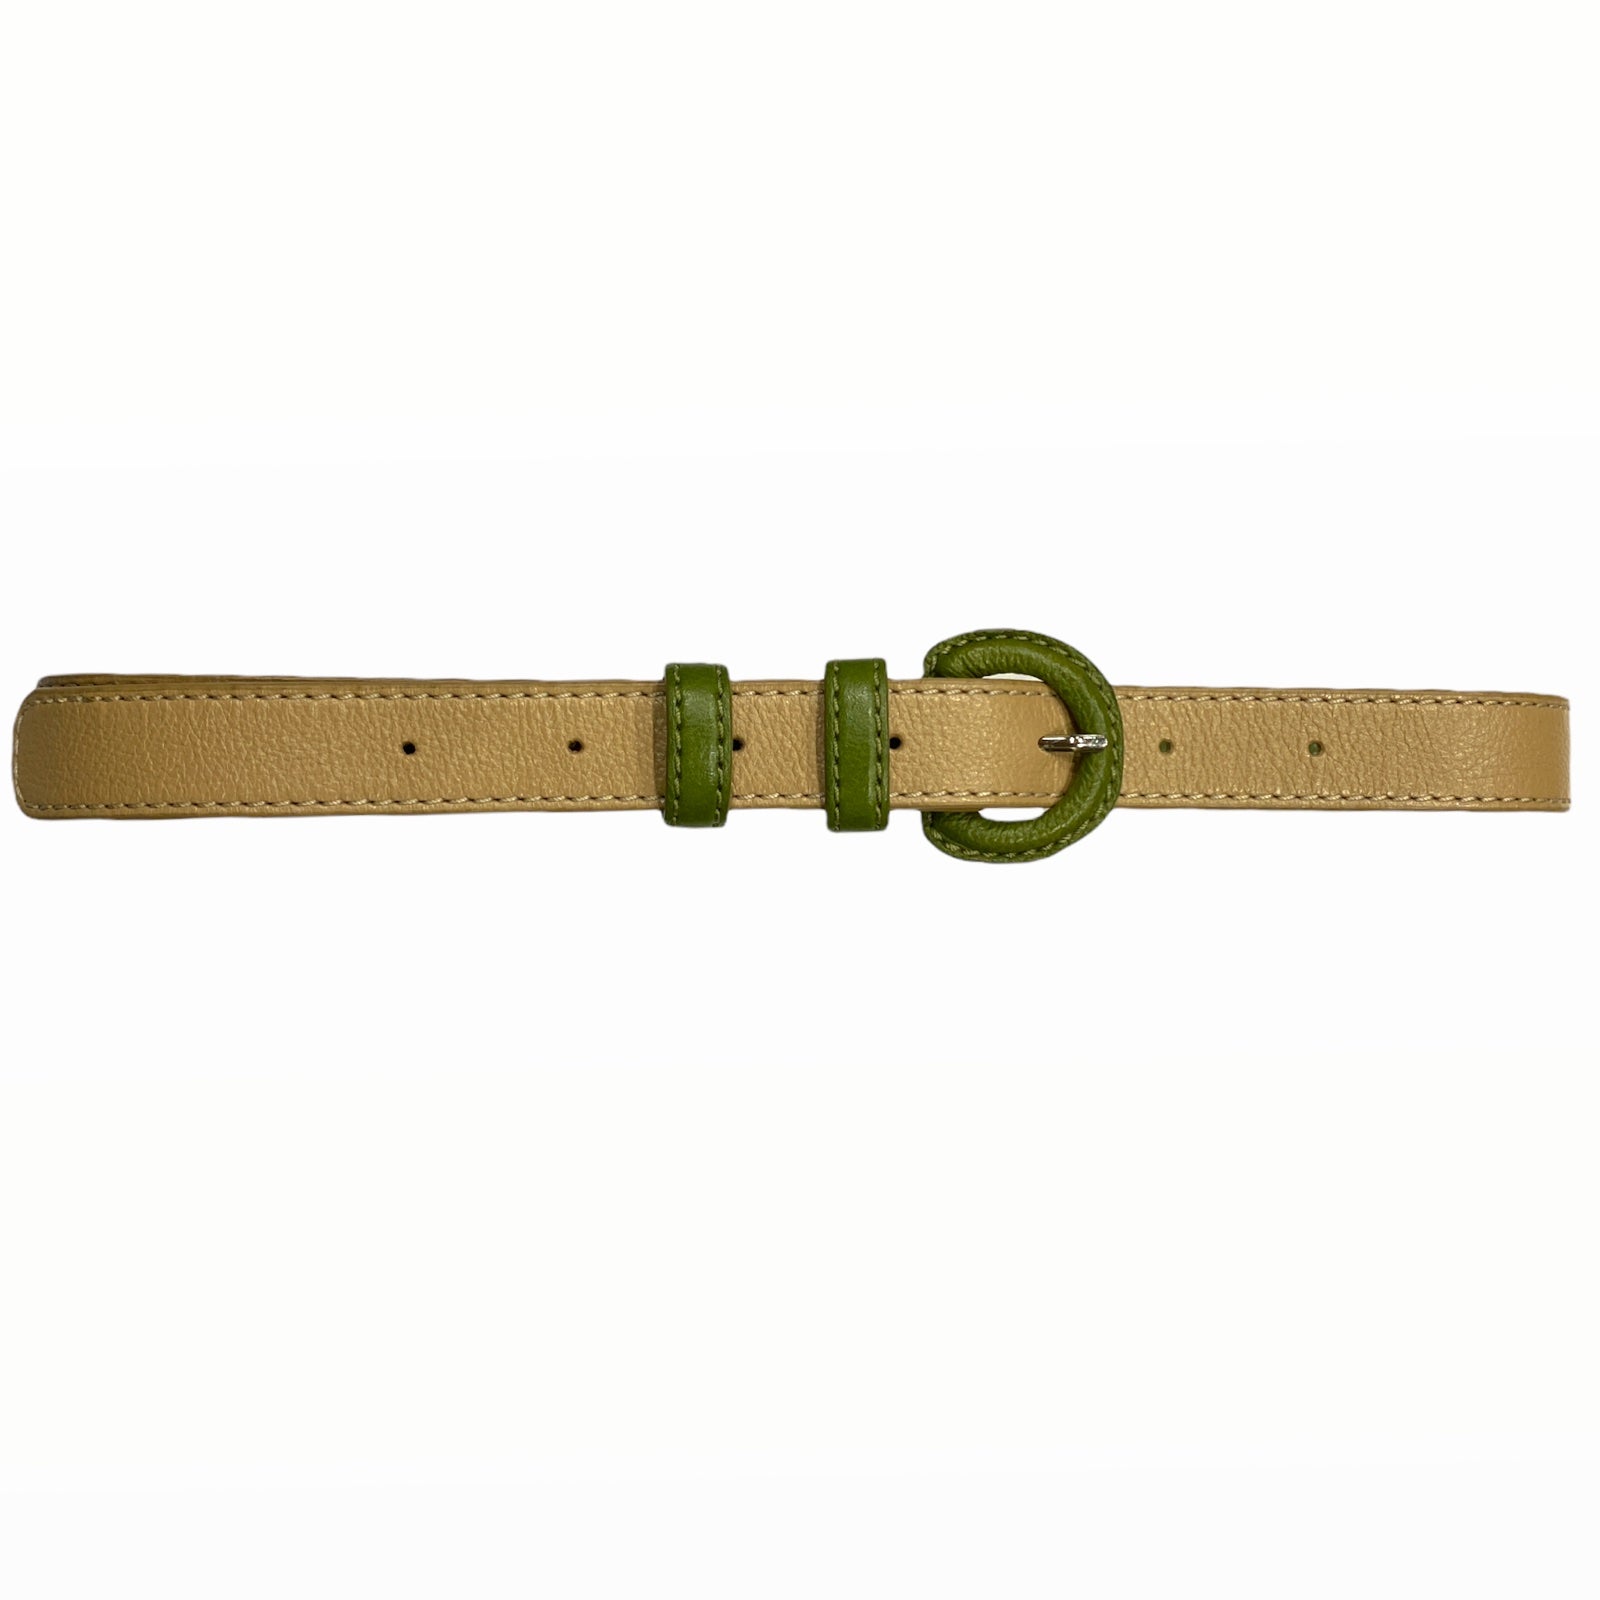 Beige leather thin belt with olive green details